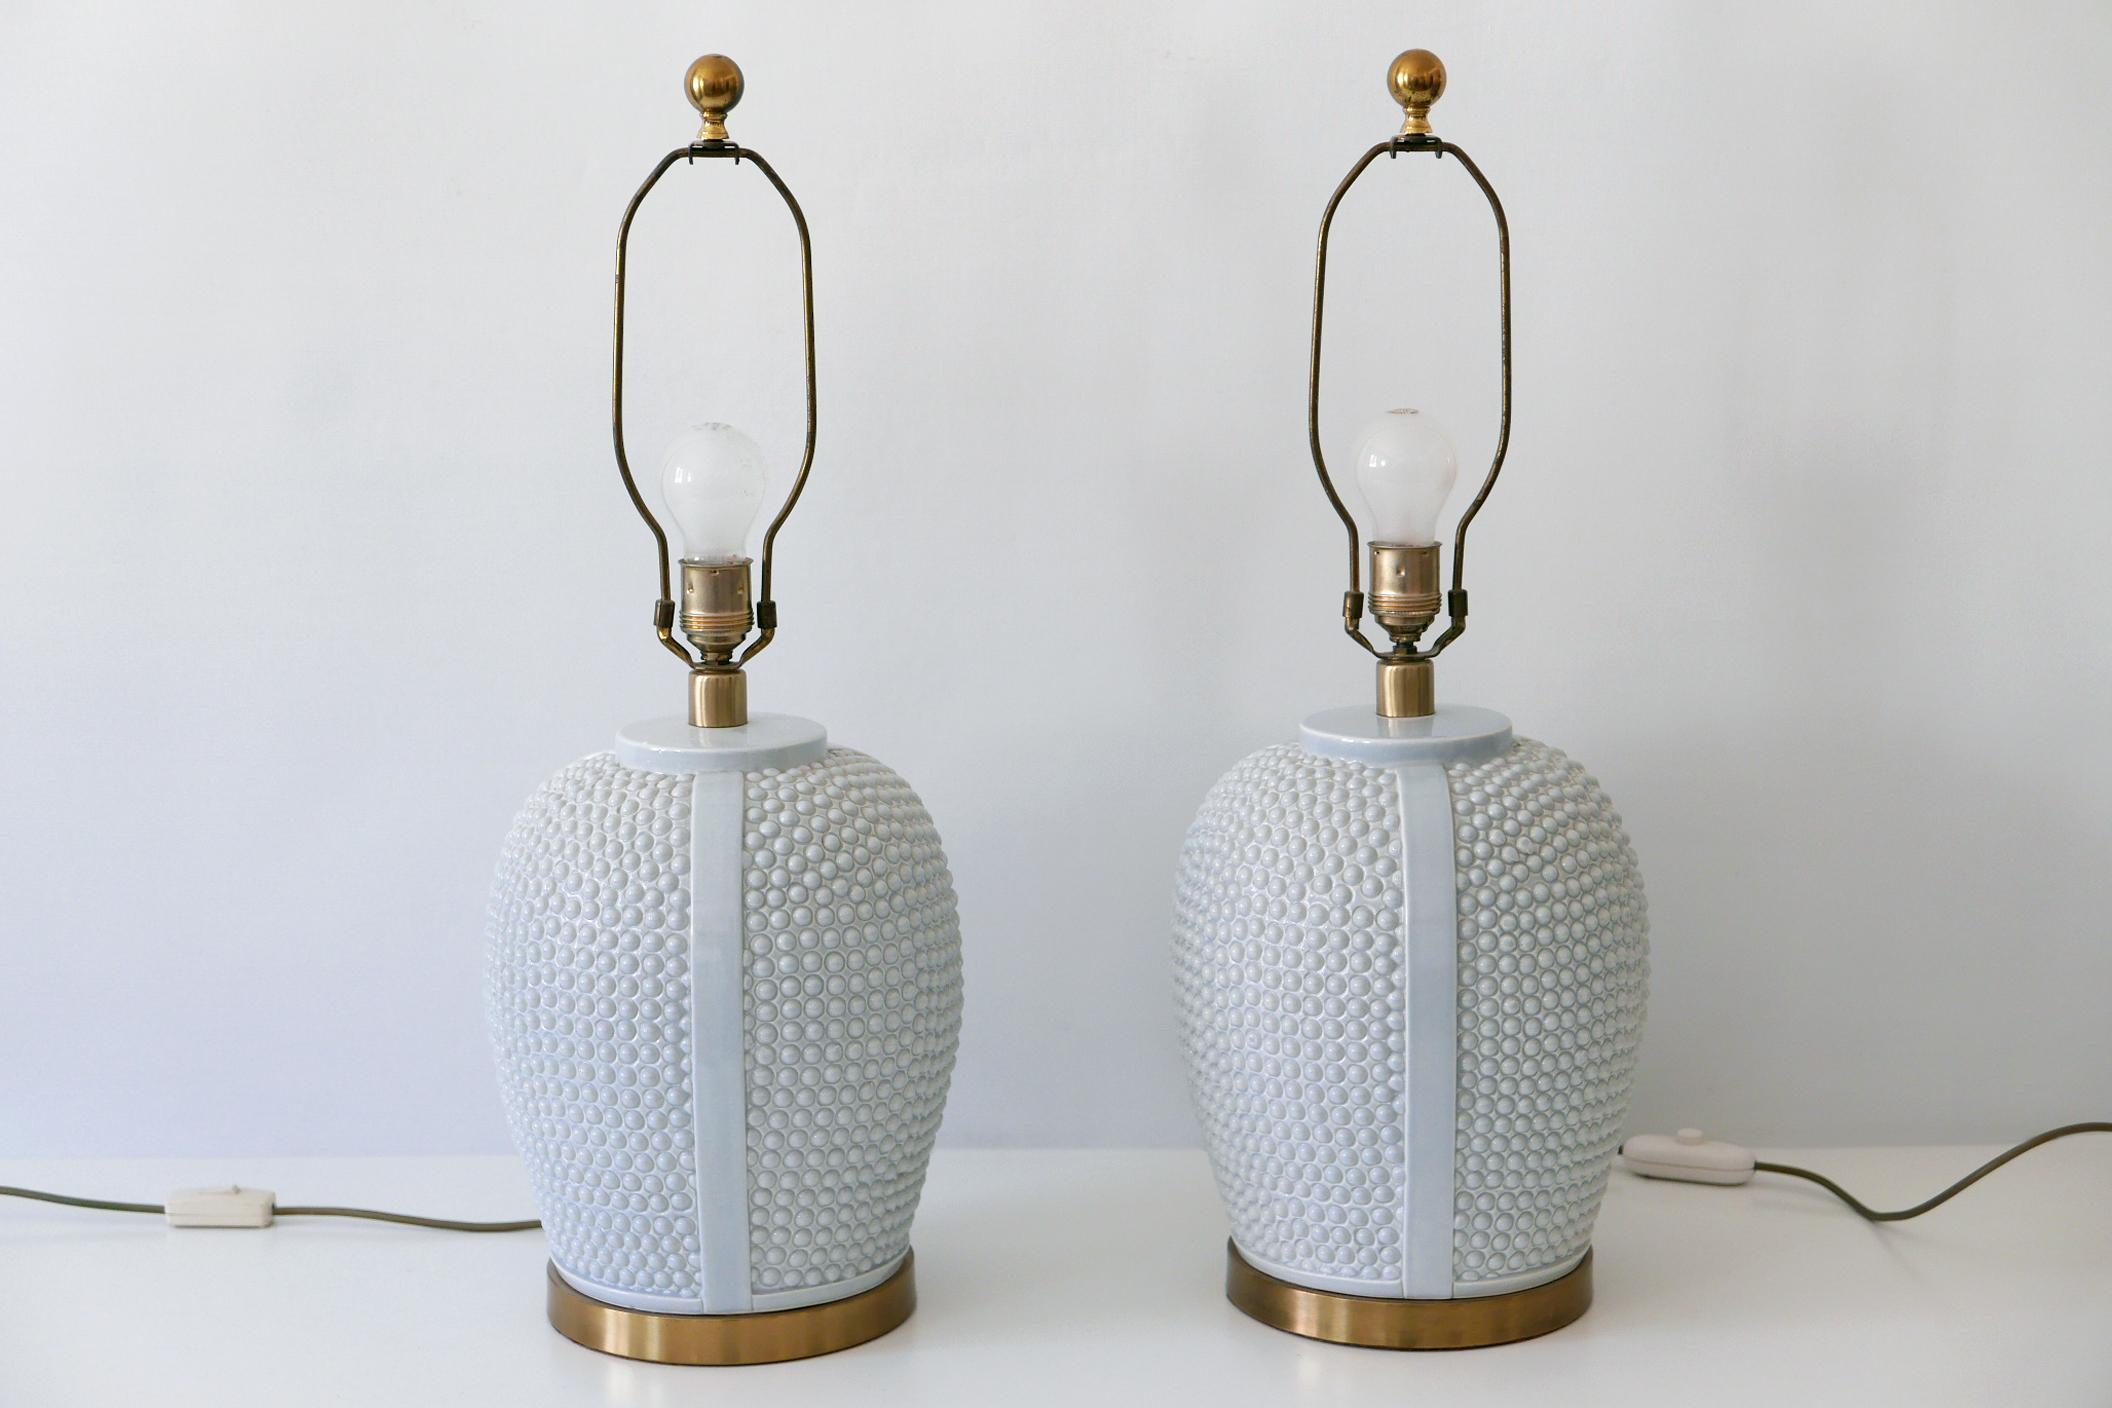 Set of Two Exceptional Mid-Century Modern Ceramic Table Lamps, 1960s, Germany For Sale 7